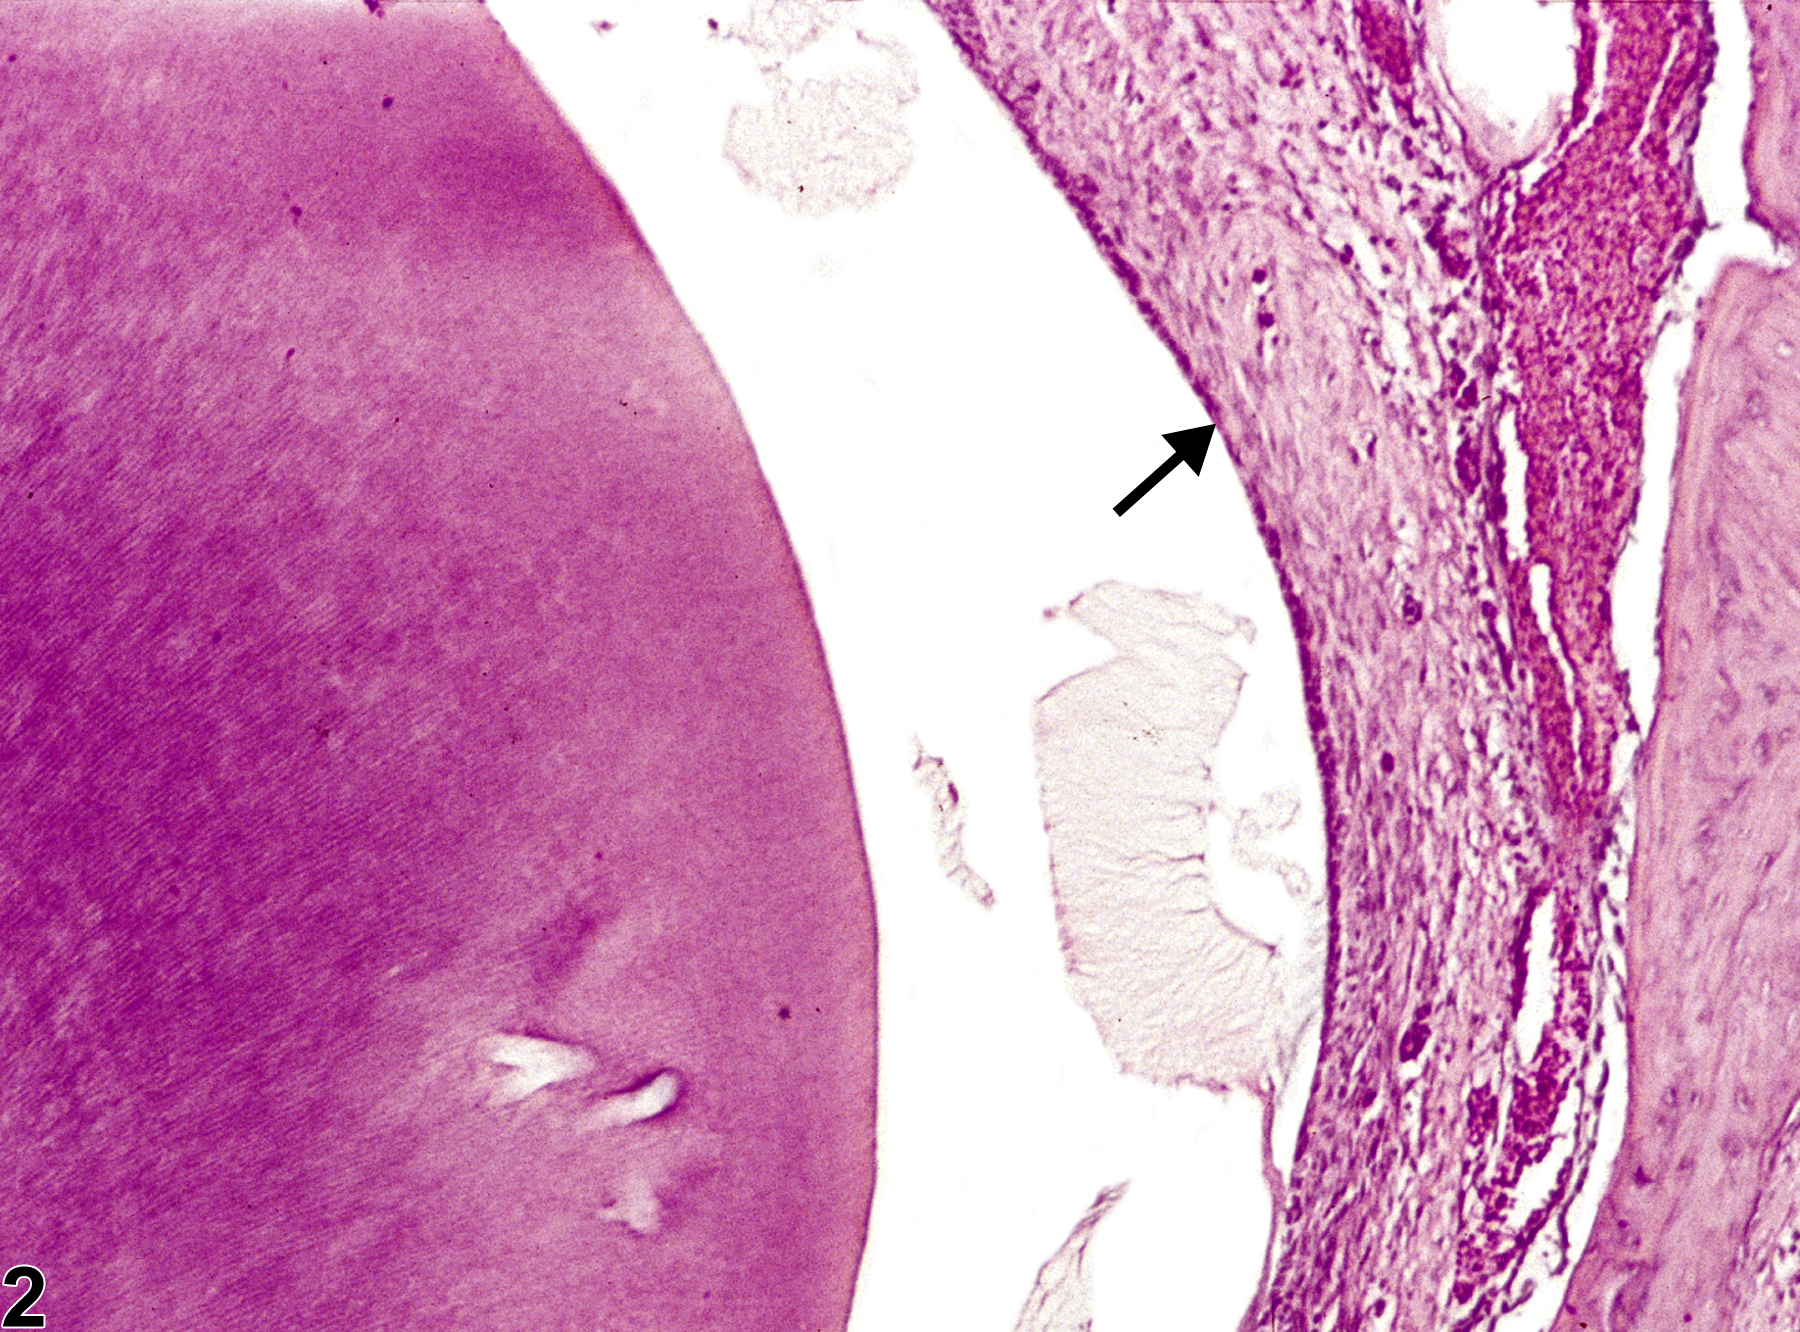 Image of atrophy in the tooth ameloblast from a male F344/N rat in a chronic study